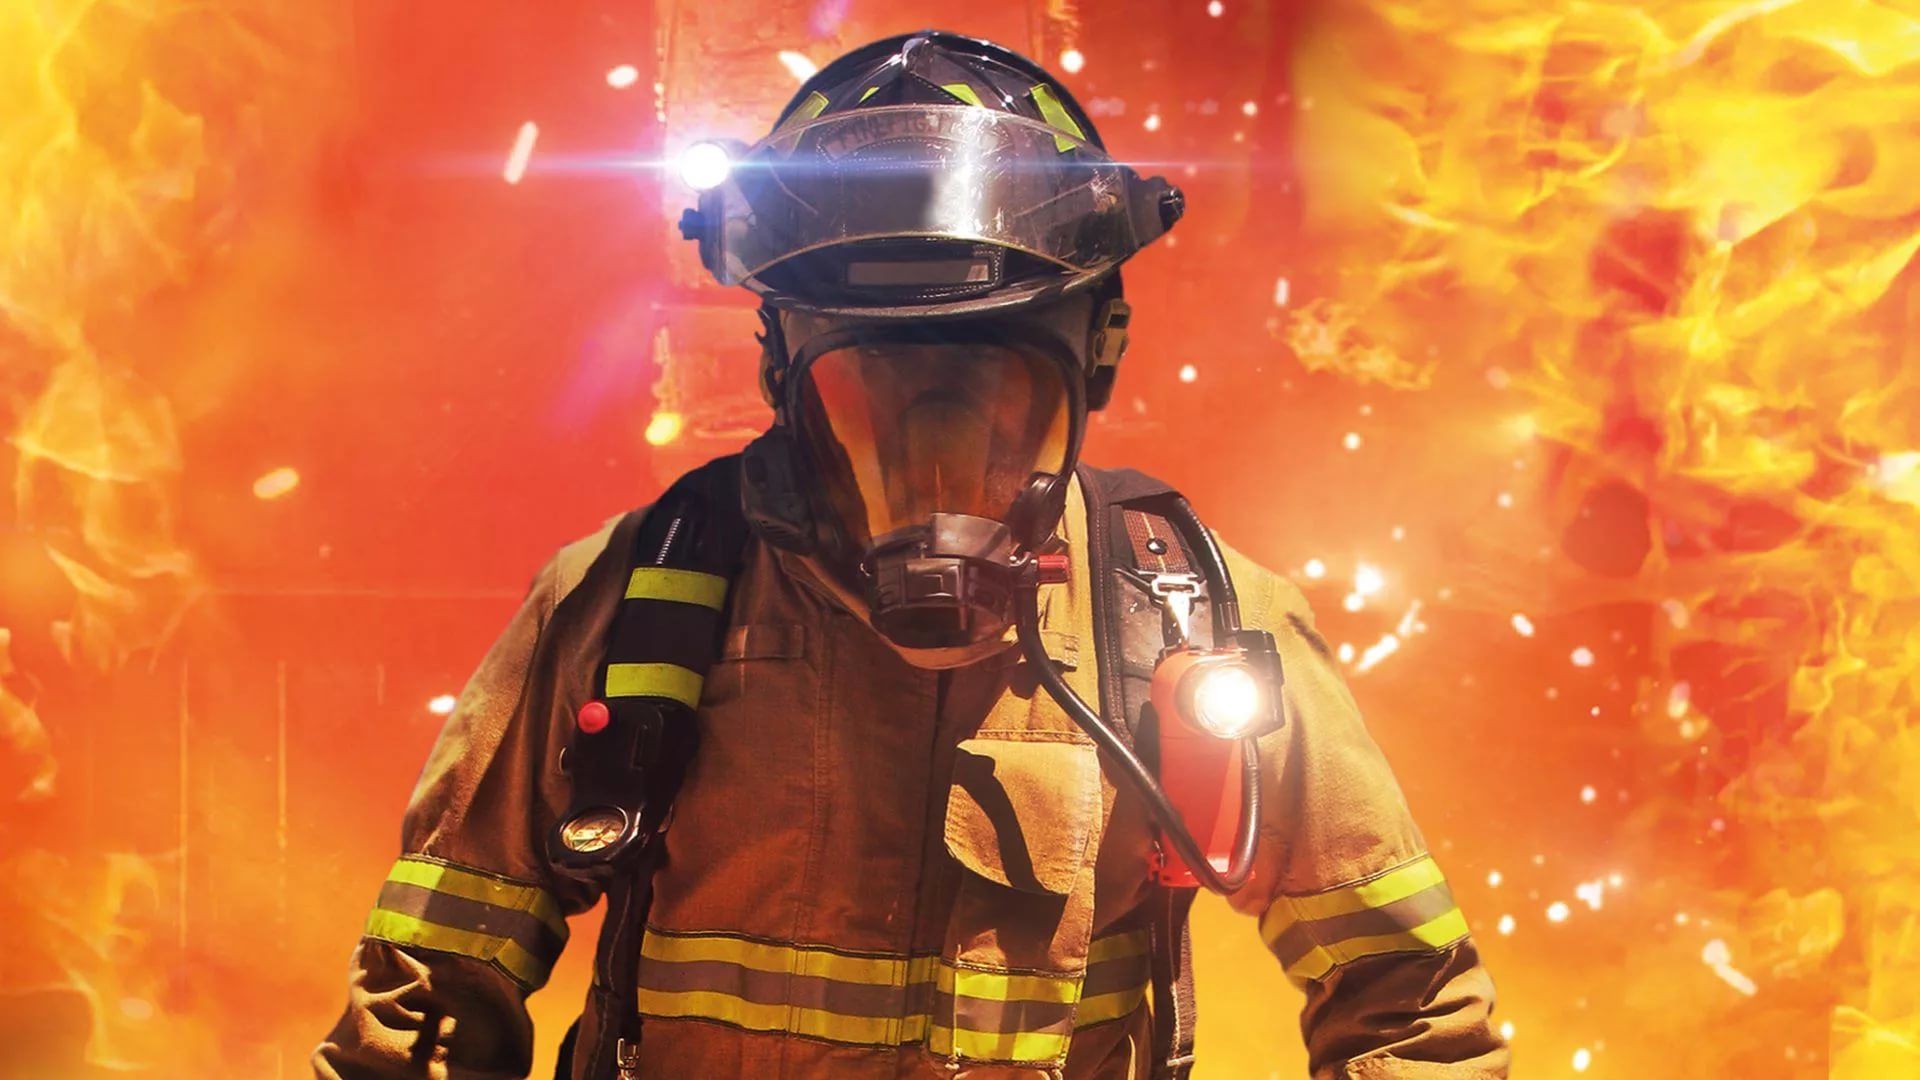 Firefighter HD Wallpapers (28+ images